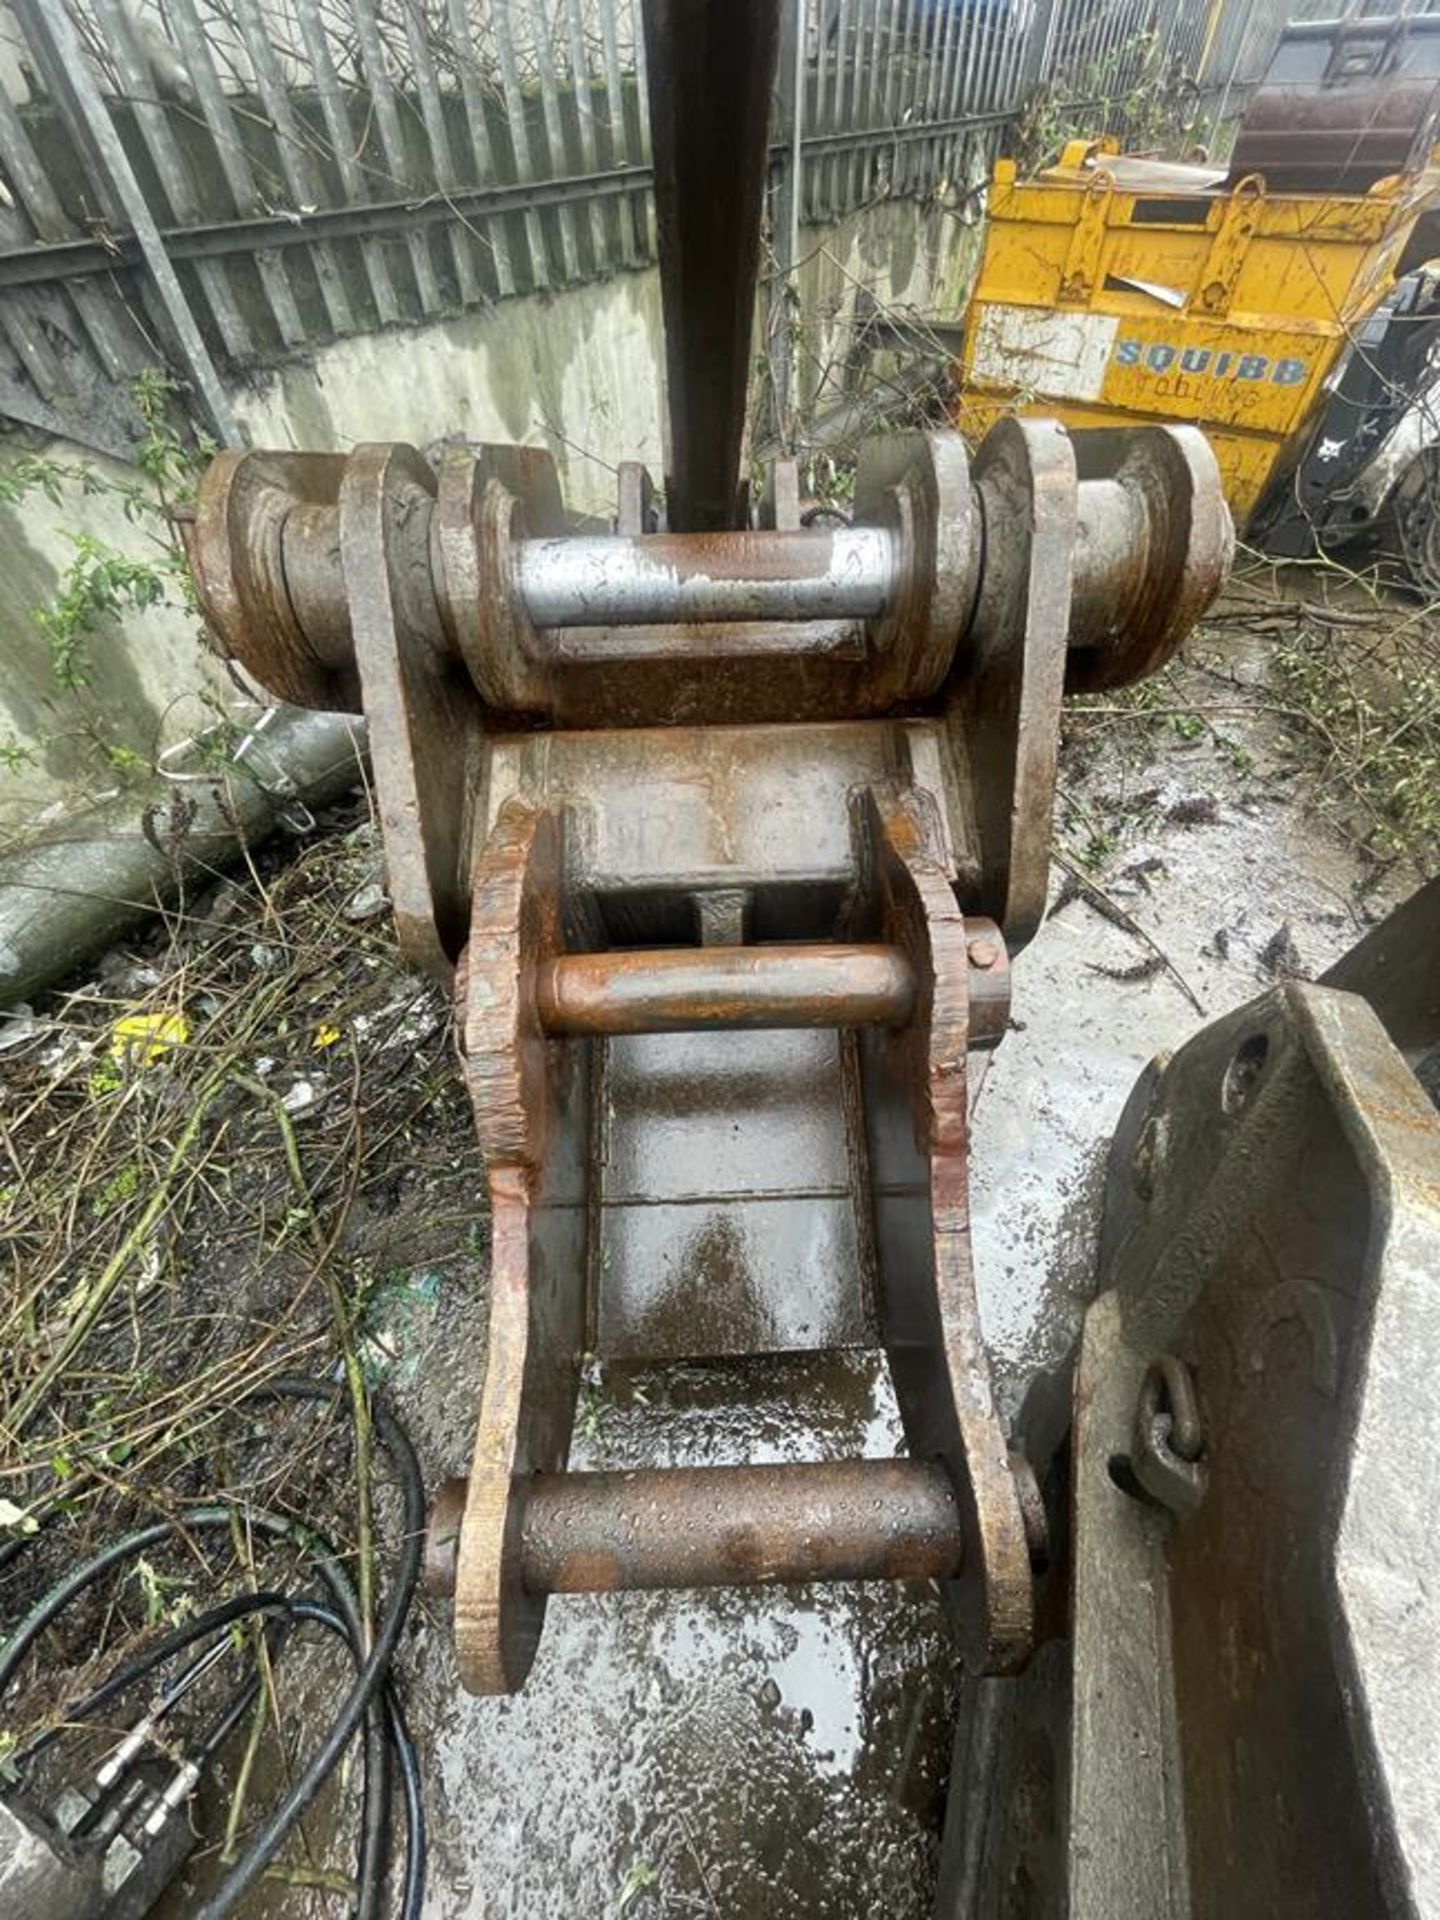 Manual Concrete Pulveriser Attachment with Link Arm - Image 8 of 8